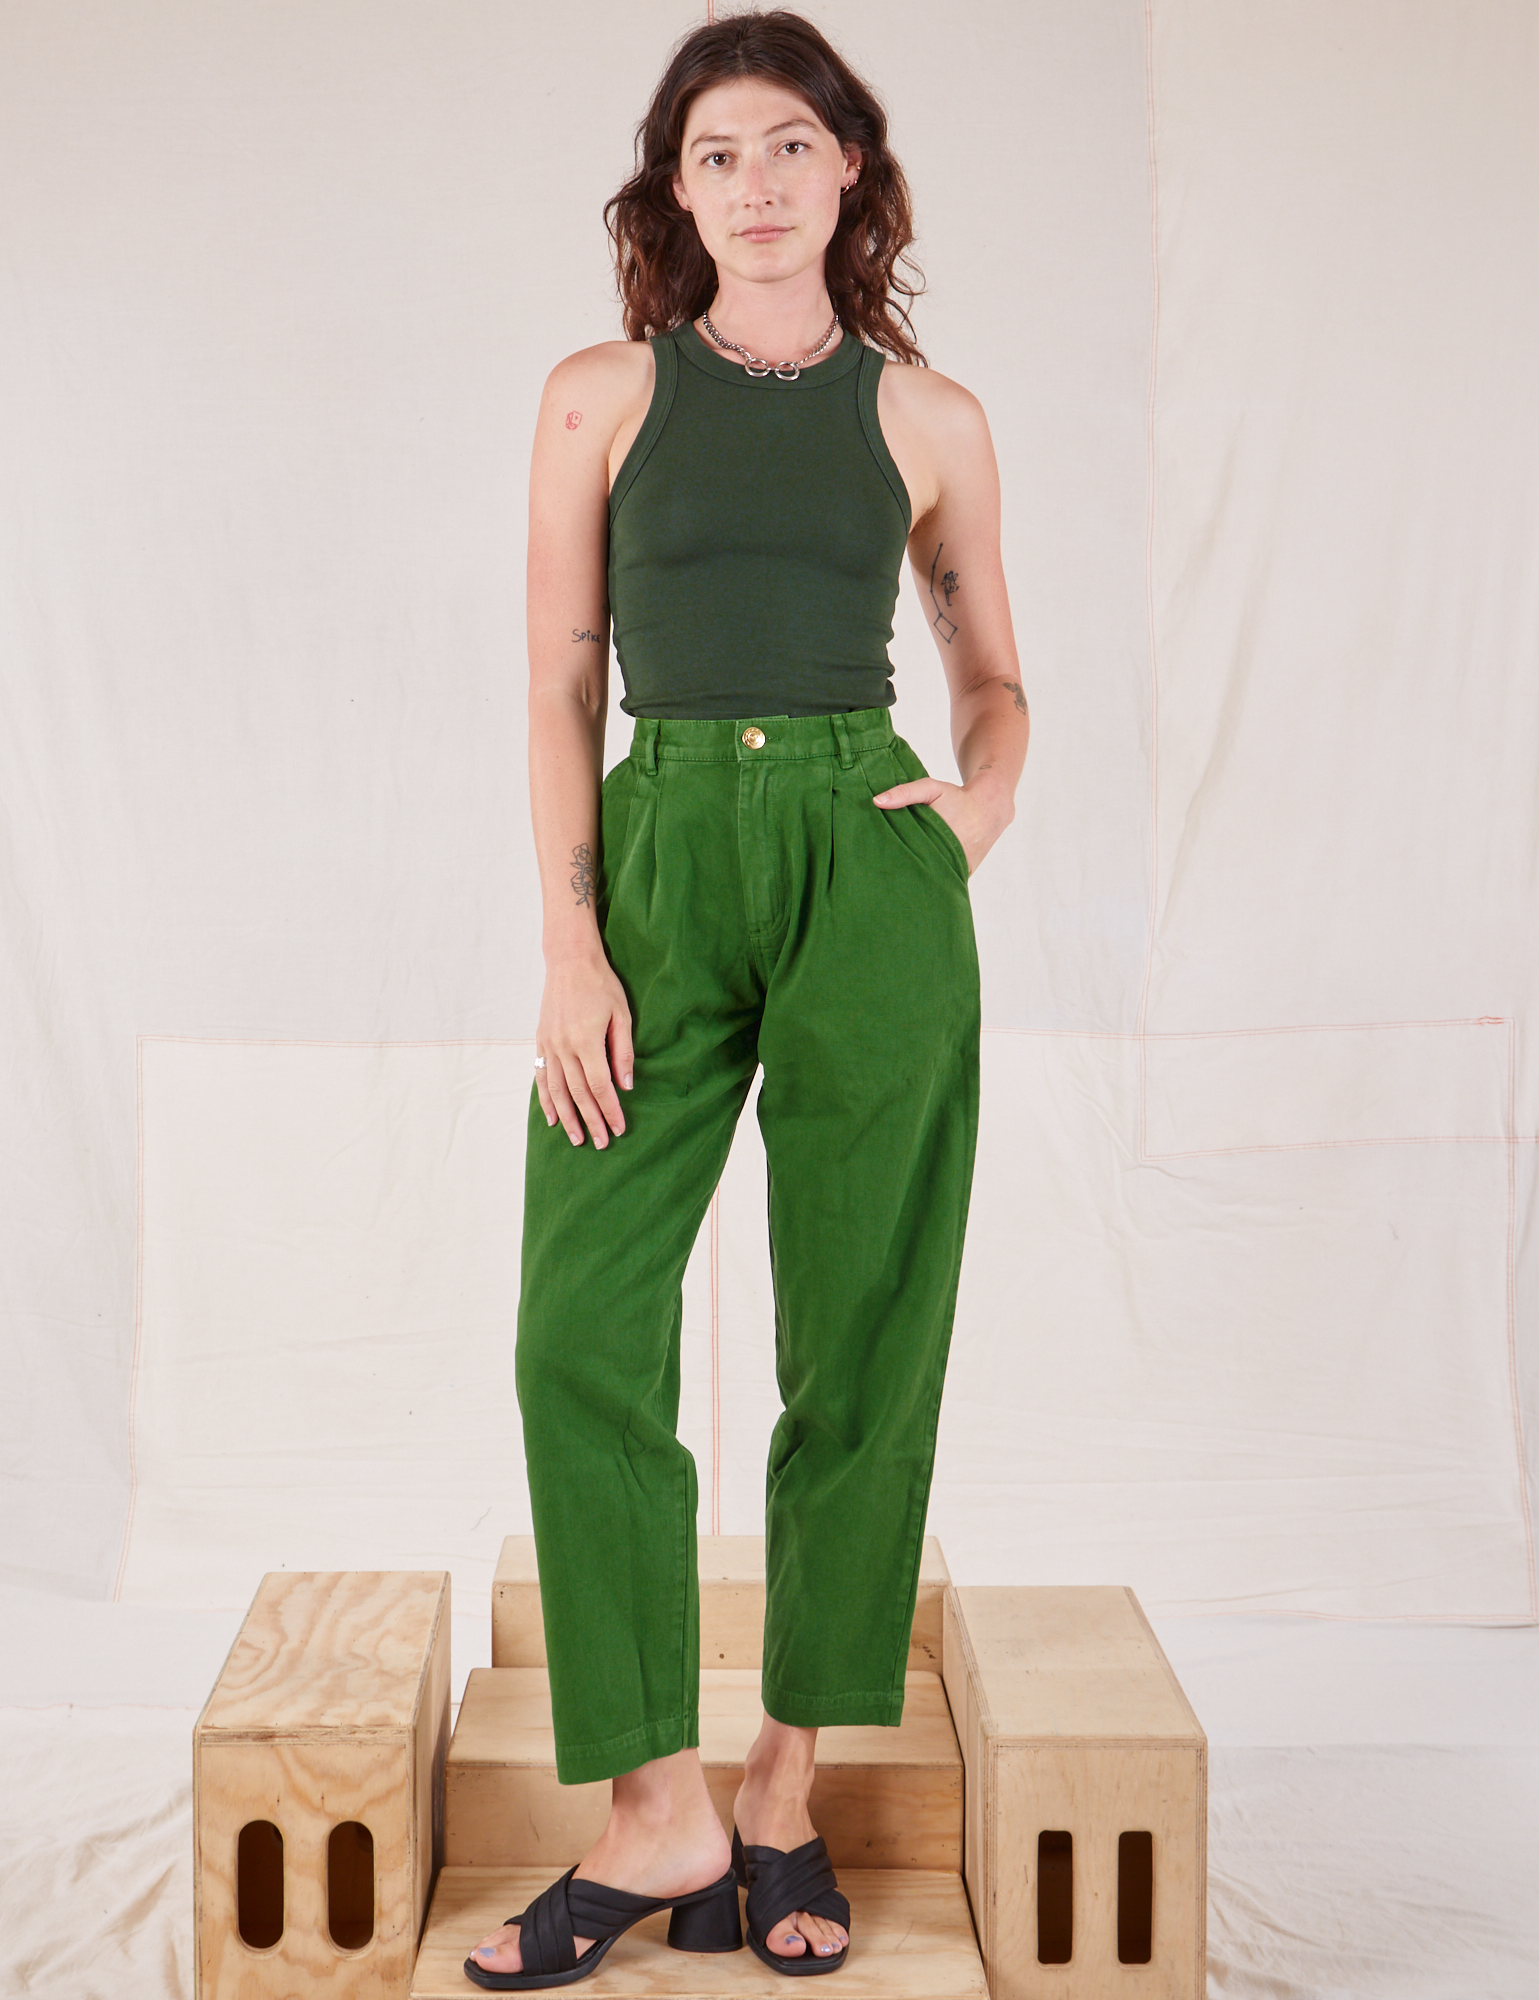 Alex is wearing Racerback Tank in Swamp Green and lawn green Trousers